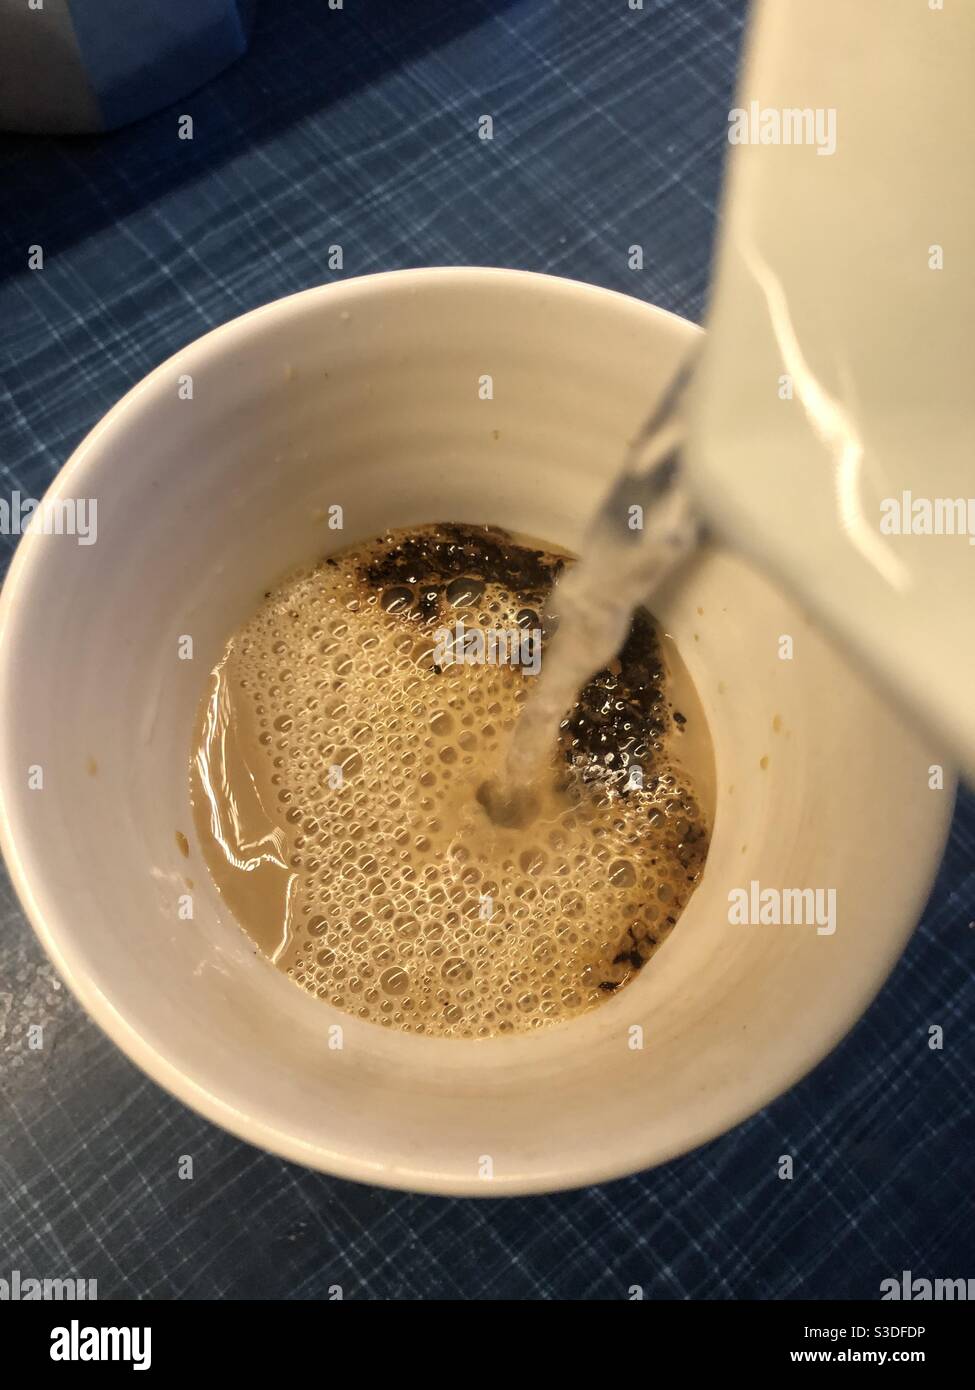 Pouring boiling water to make an instant coffee Stock Photo